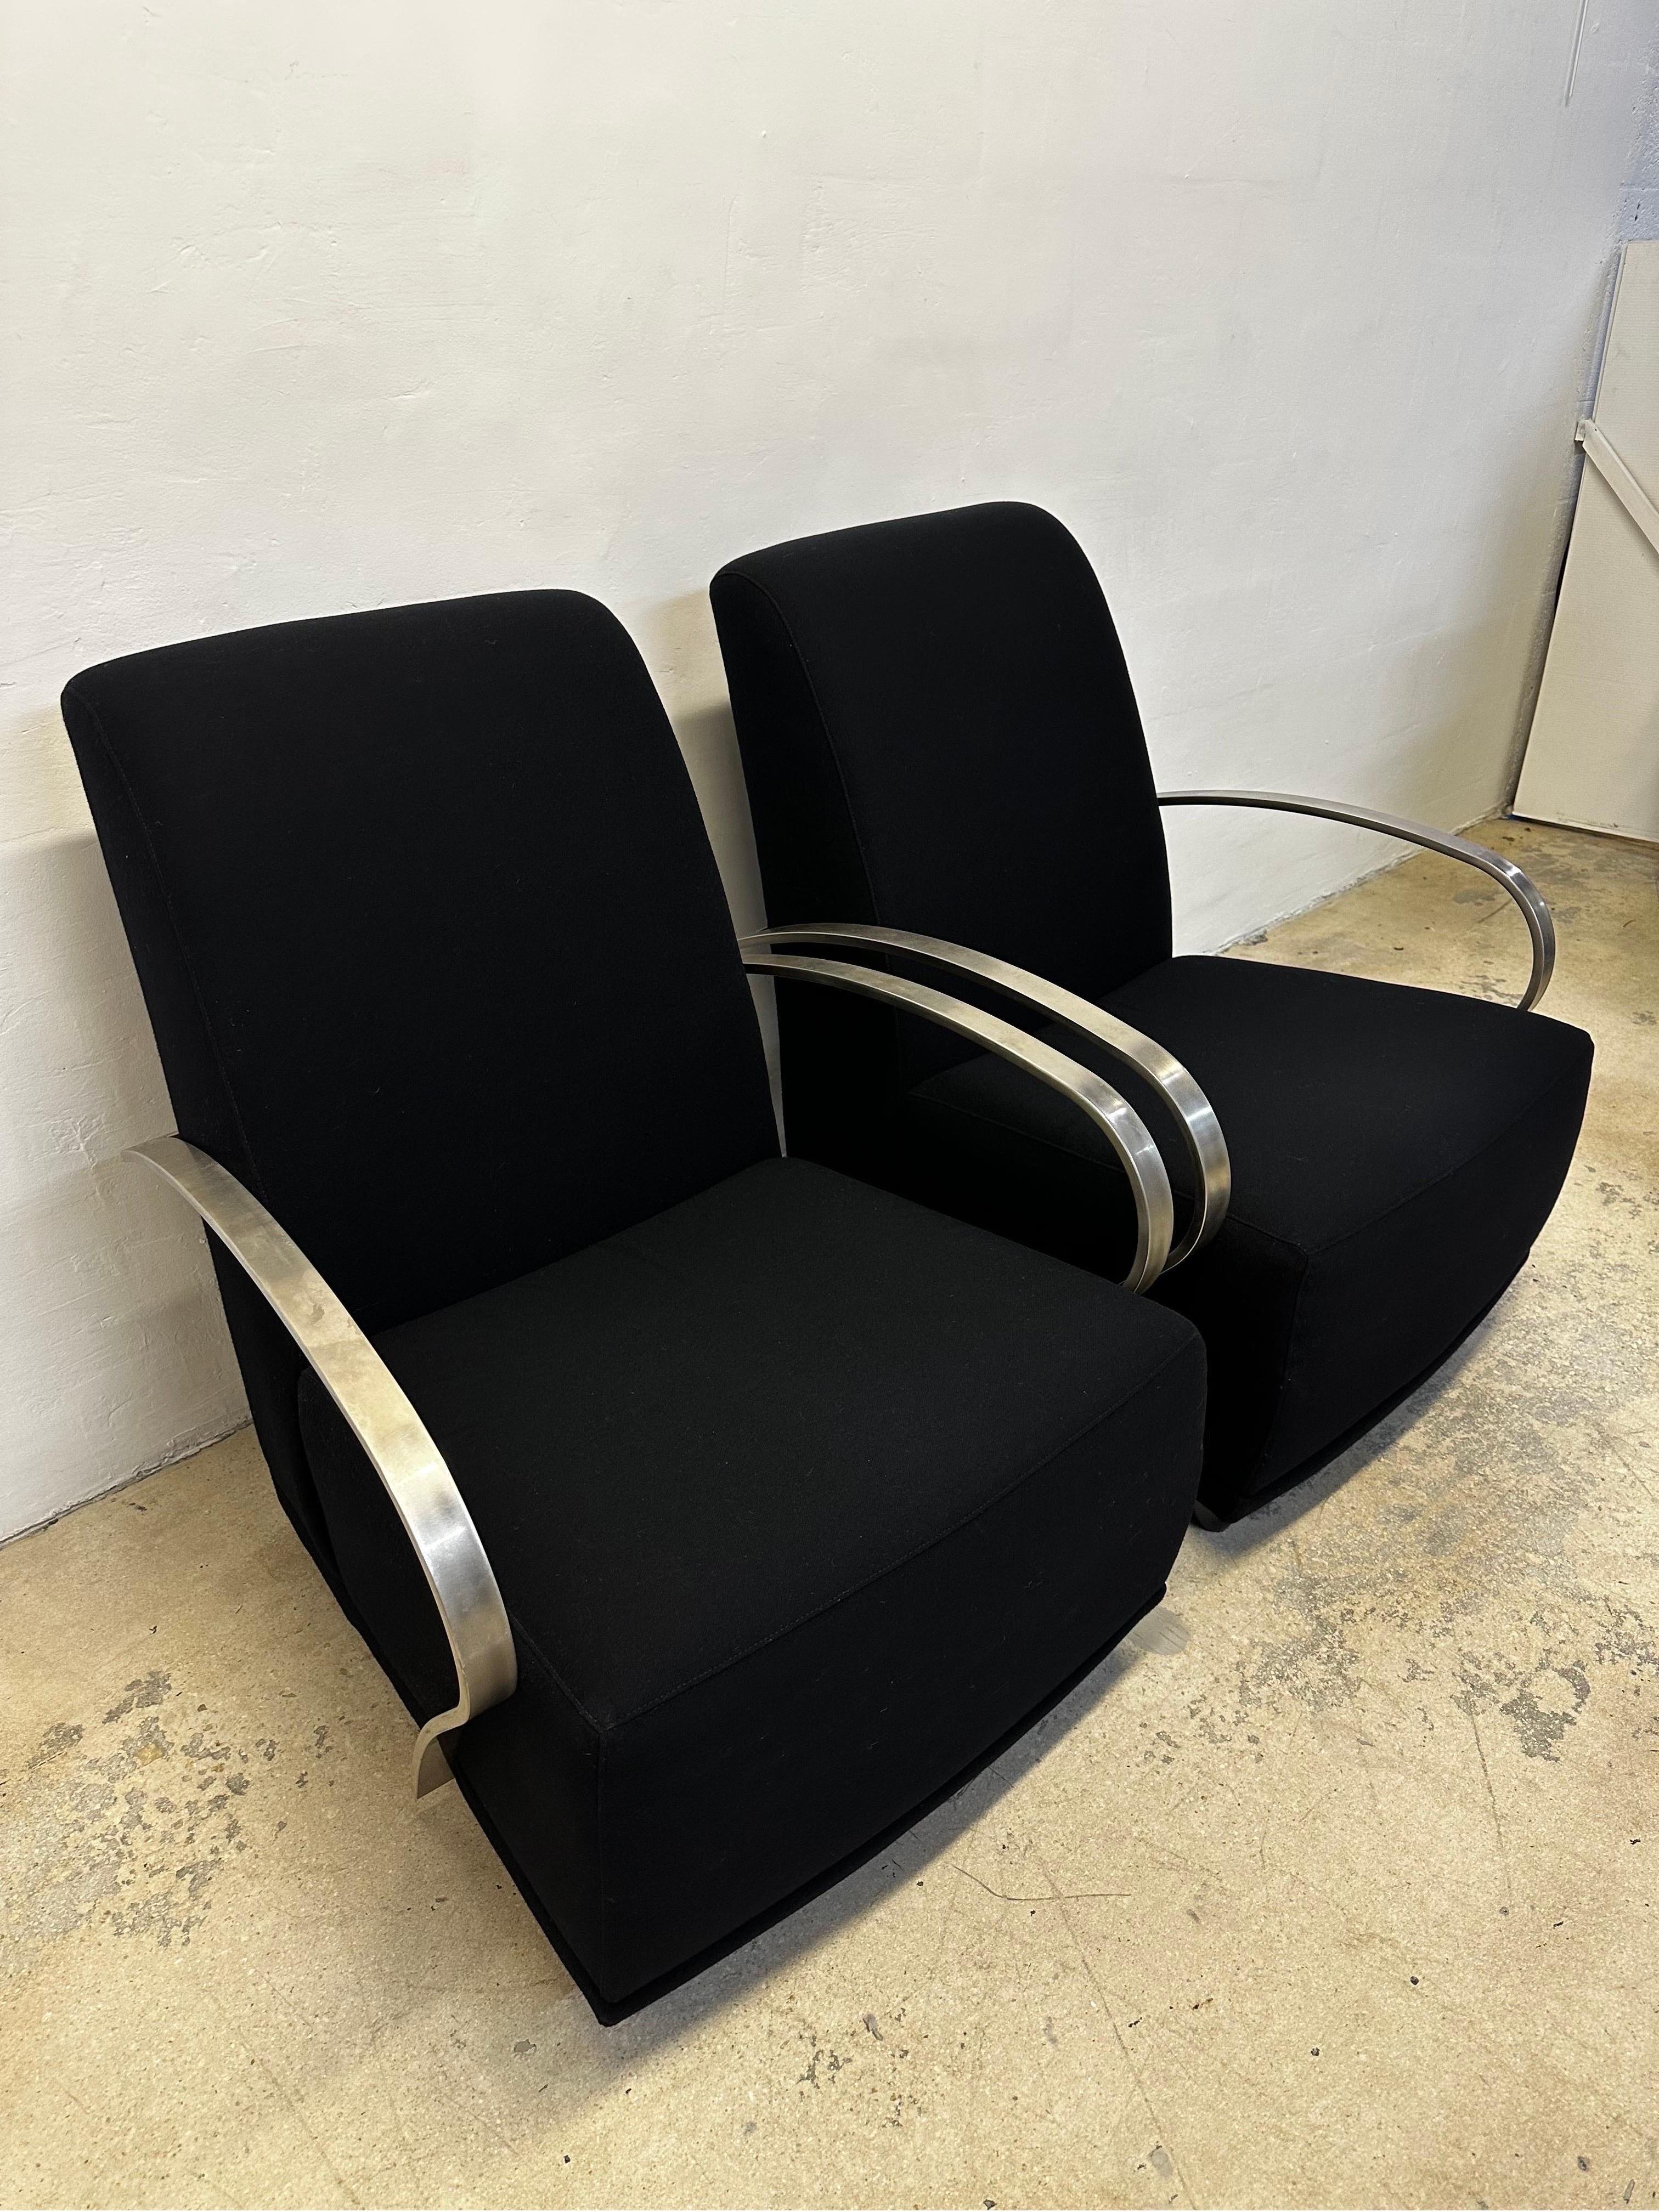 Art Deco Revival Black Lounge Chairs With Steel Arms by Directional - a Pair In Good Condition For Sale In Miami, FL